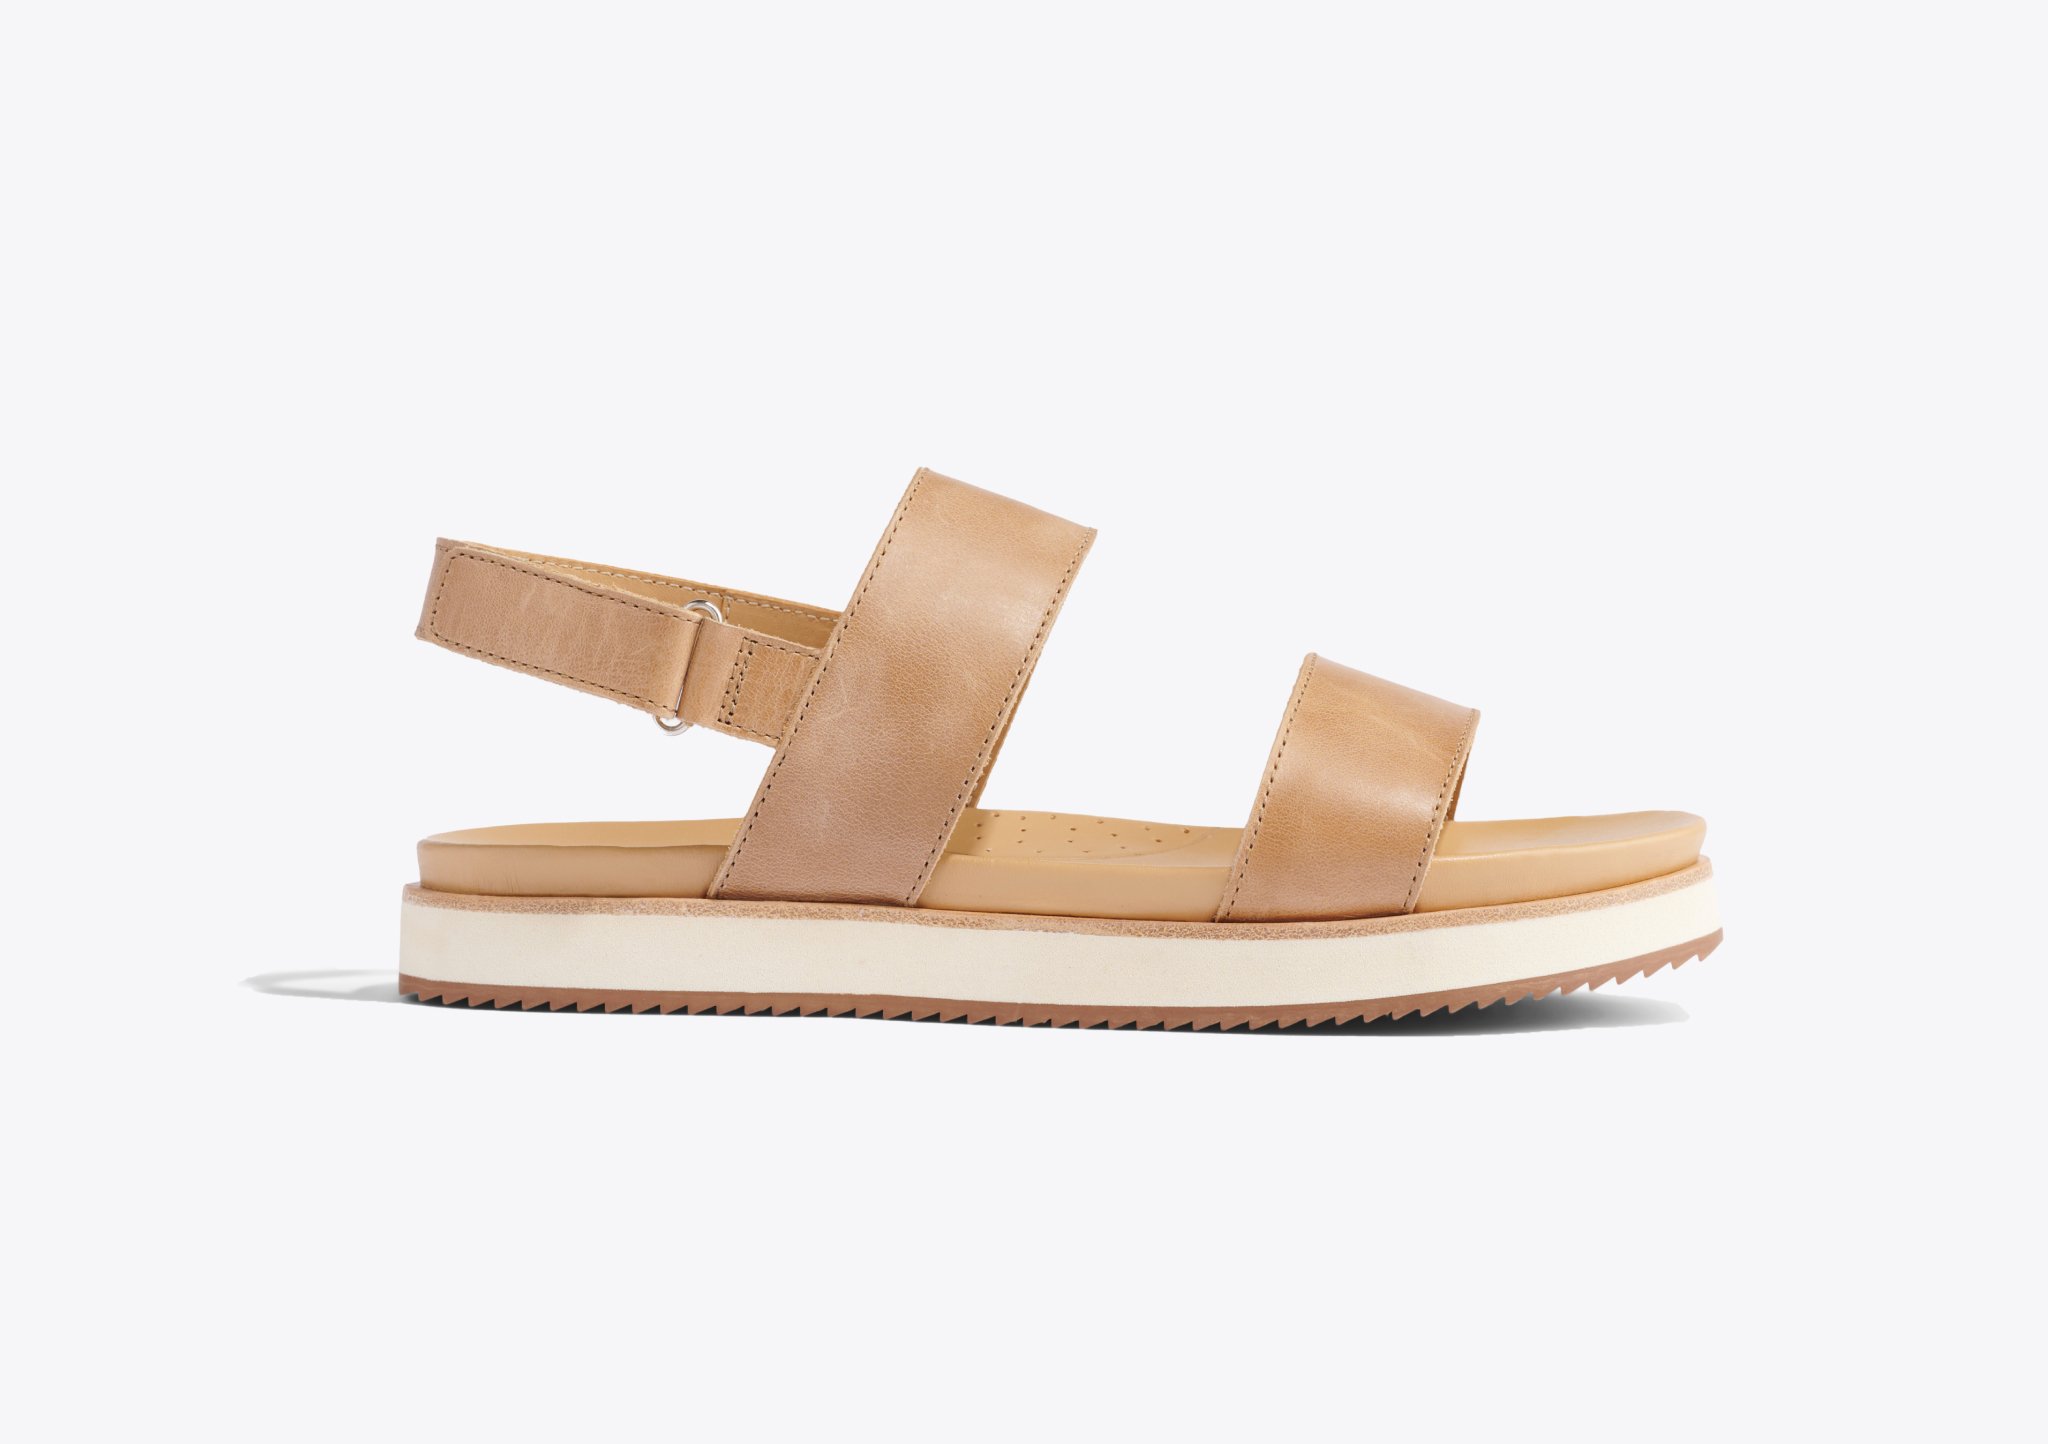 Nisolo Go-To Flatform Sandal 2.0 Almond - Every Nisolo product is built on the foundation of comfort, function, and design. 